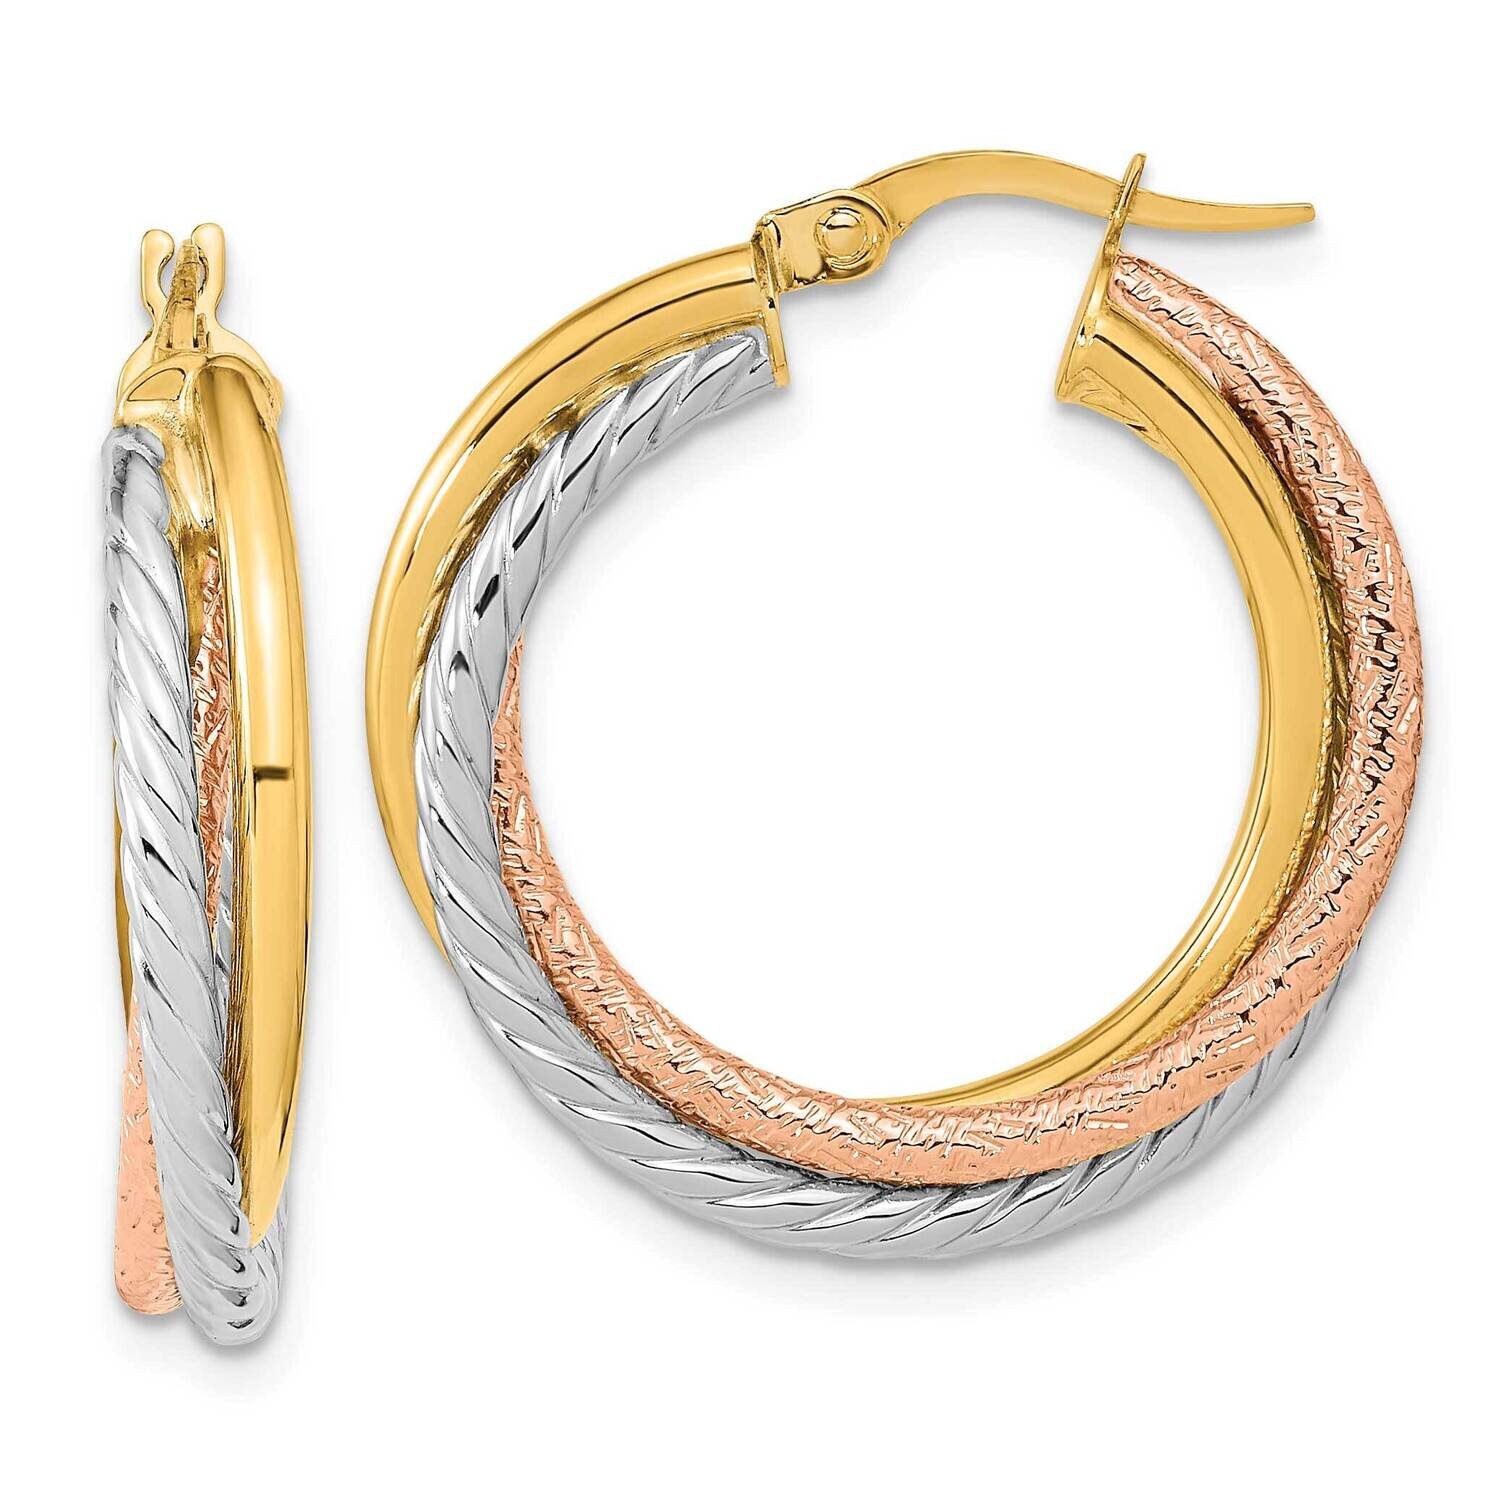 White and Rose Rhodium Polished and Textured Hoop Earrings 14k Gold TF2122